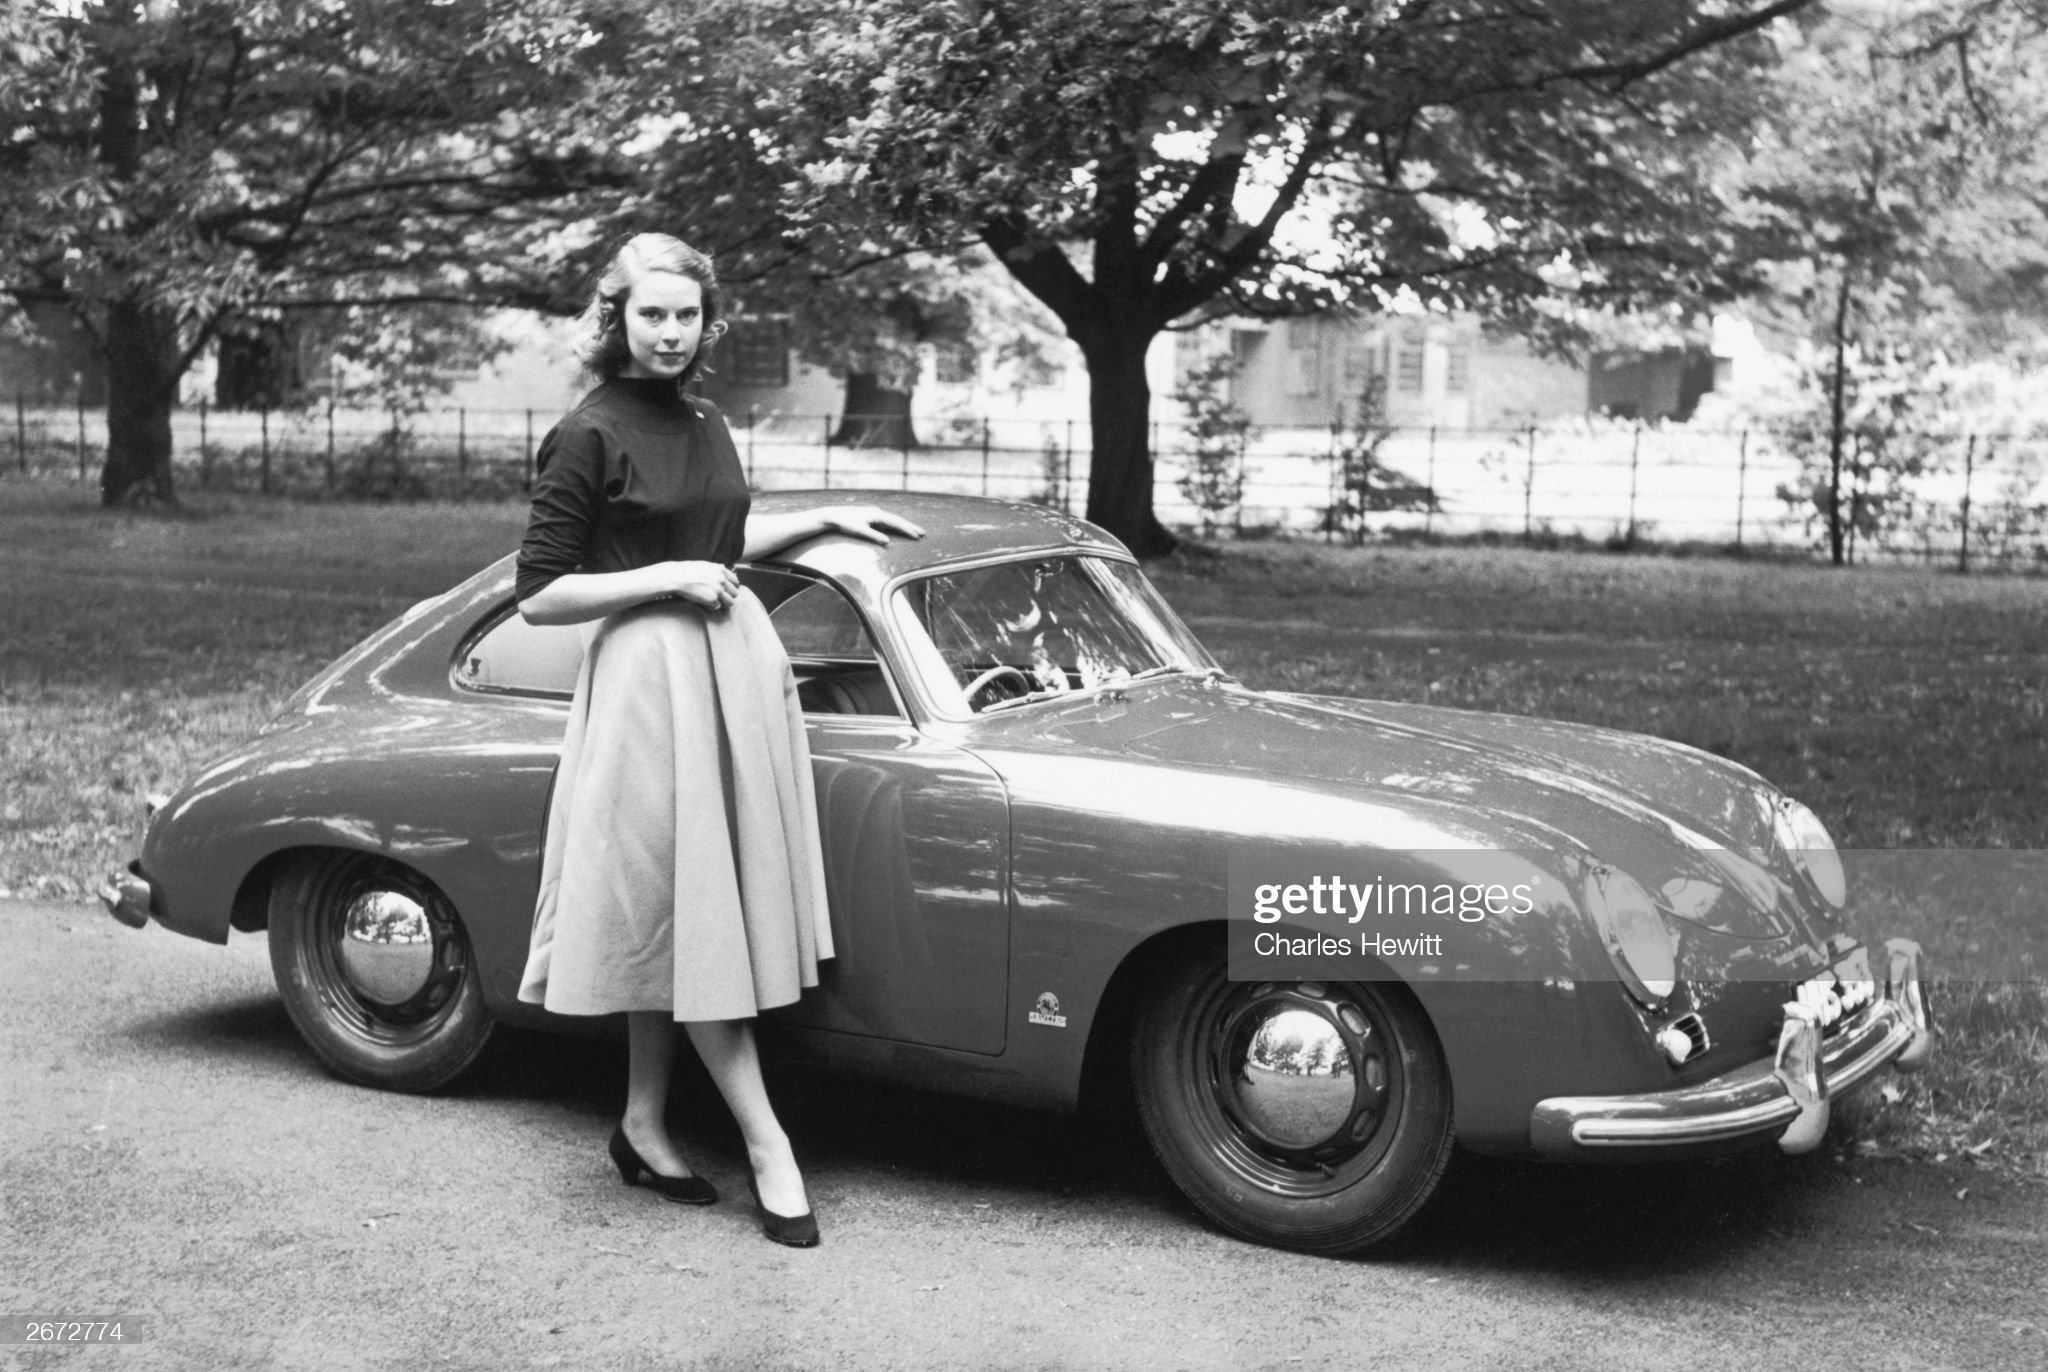 A woman and a Porsche coupe on October 23, 1954.